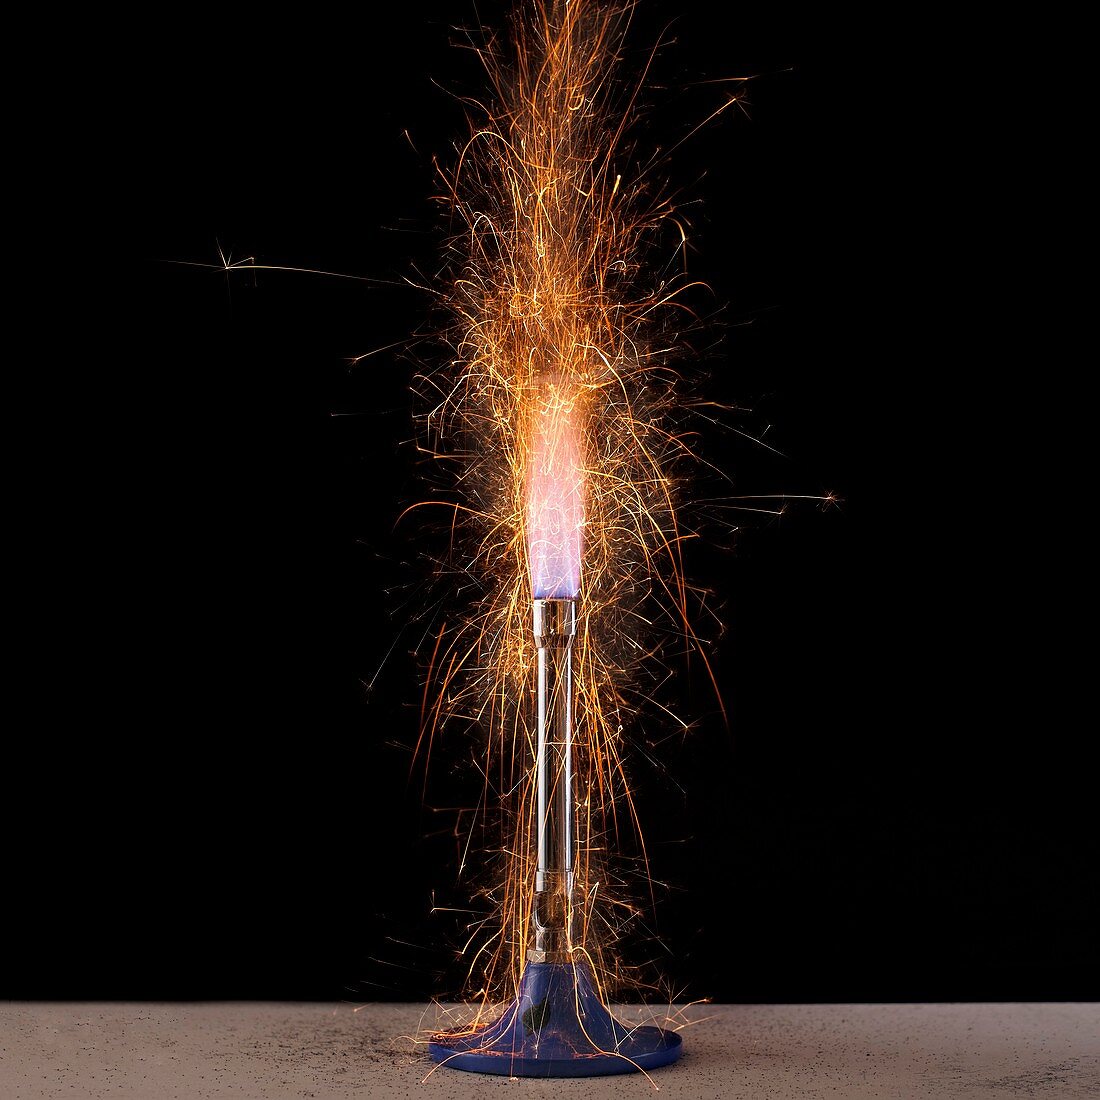 Iron filings in a gas flame